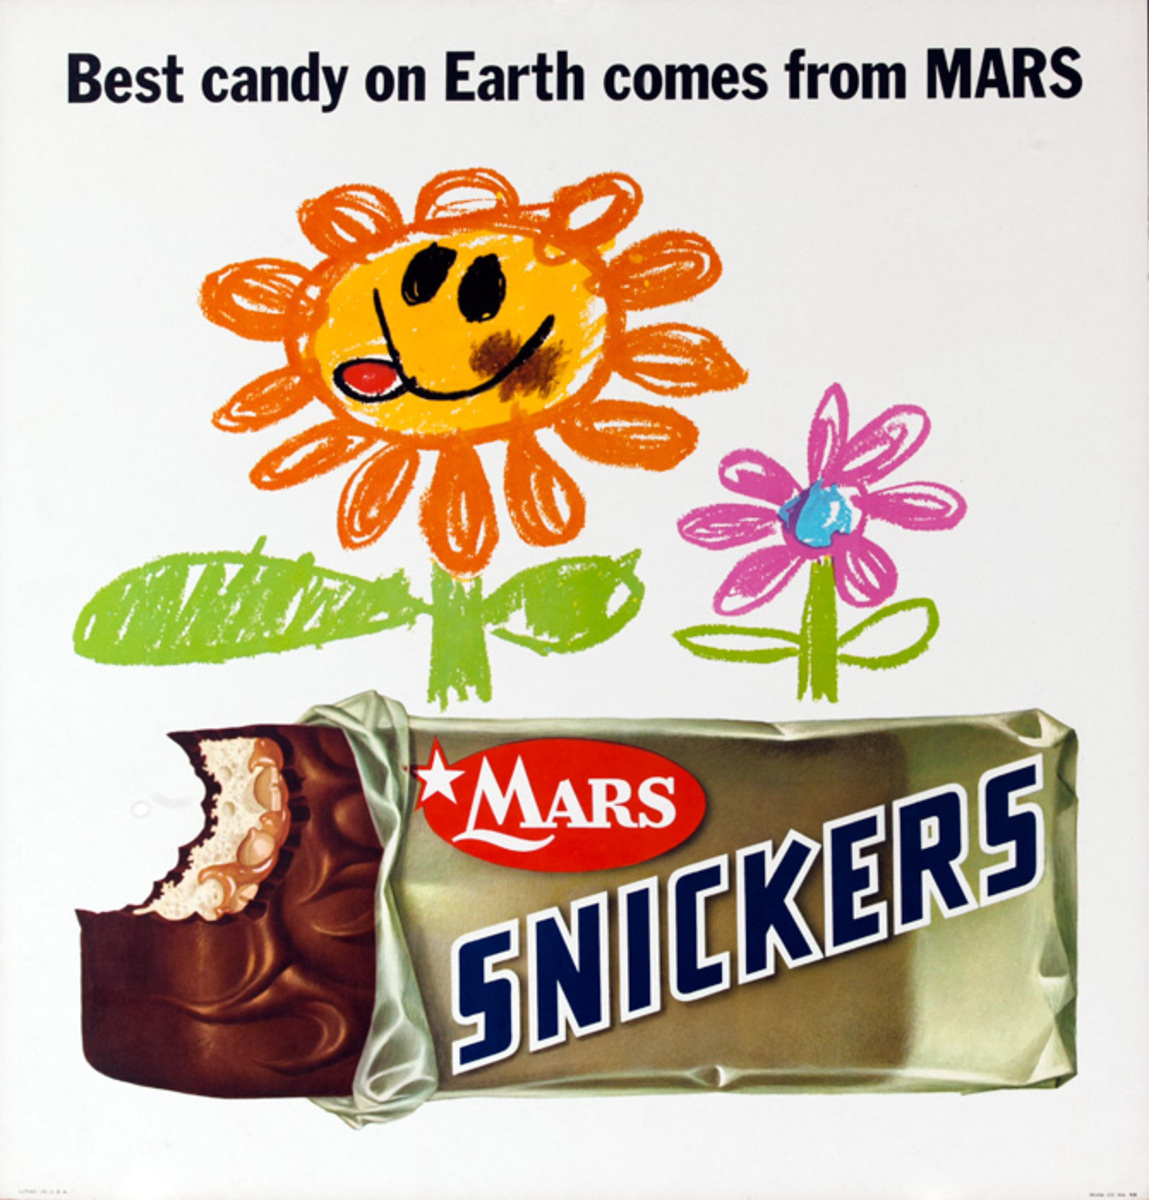 Mars Candy Original Advertising Poster, Best candy on earth comes from MARS. Flower